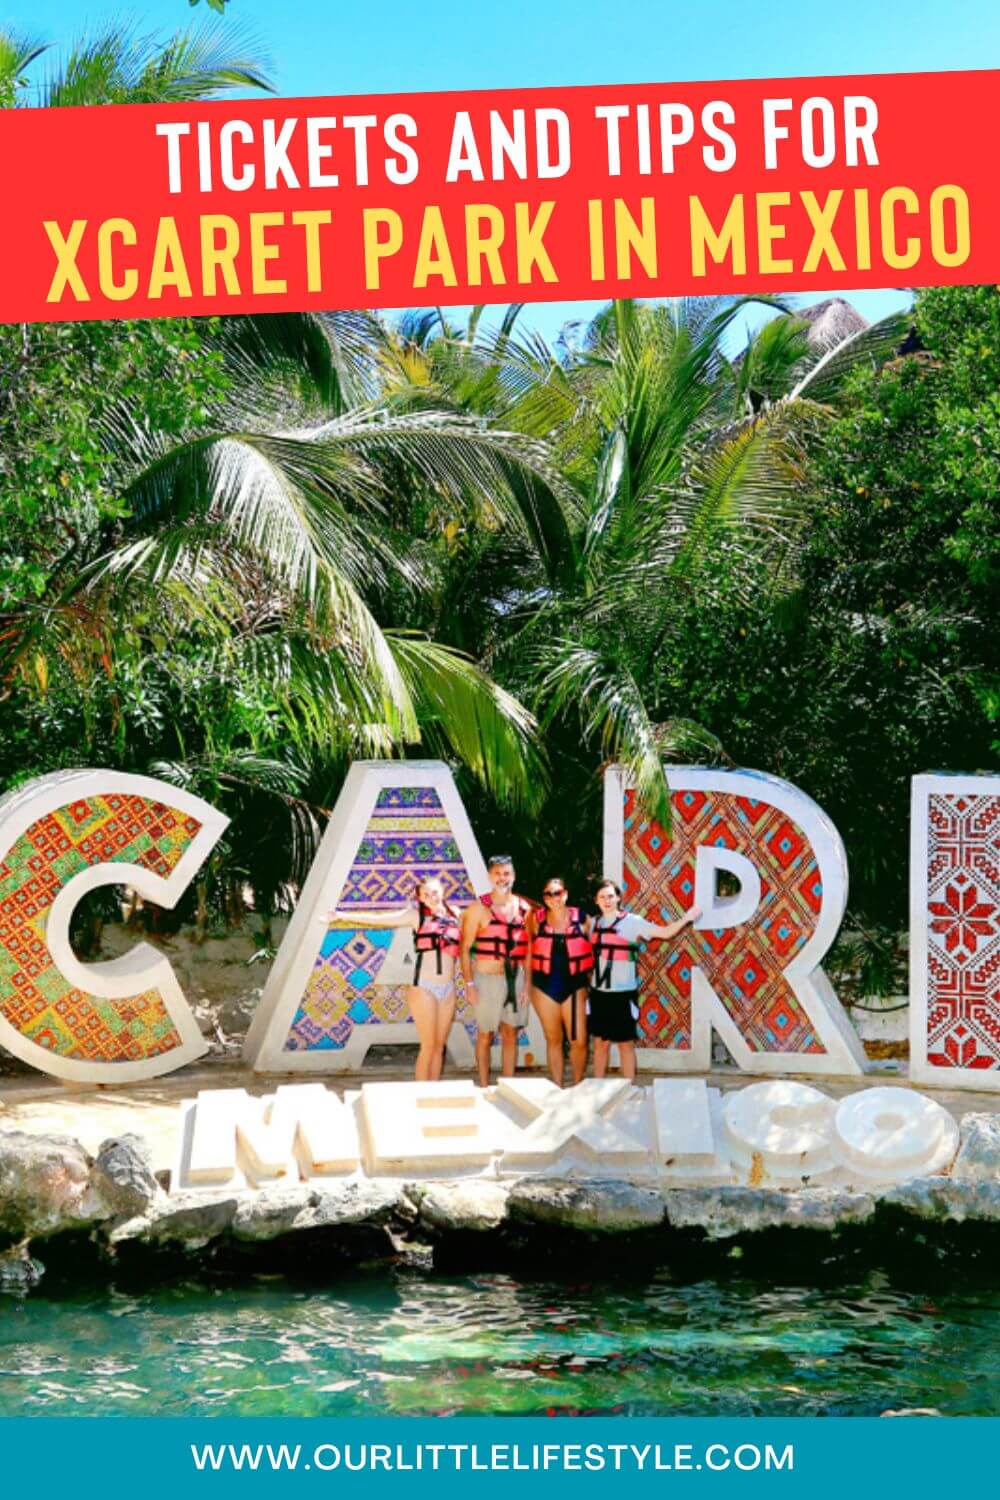 How to visit Xcaret Park